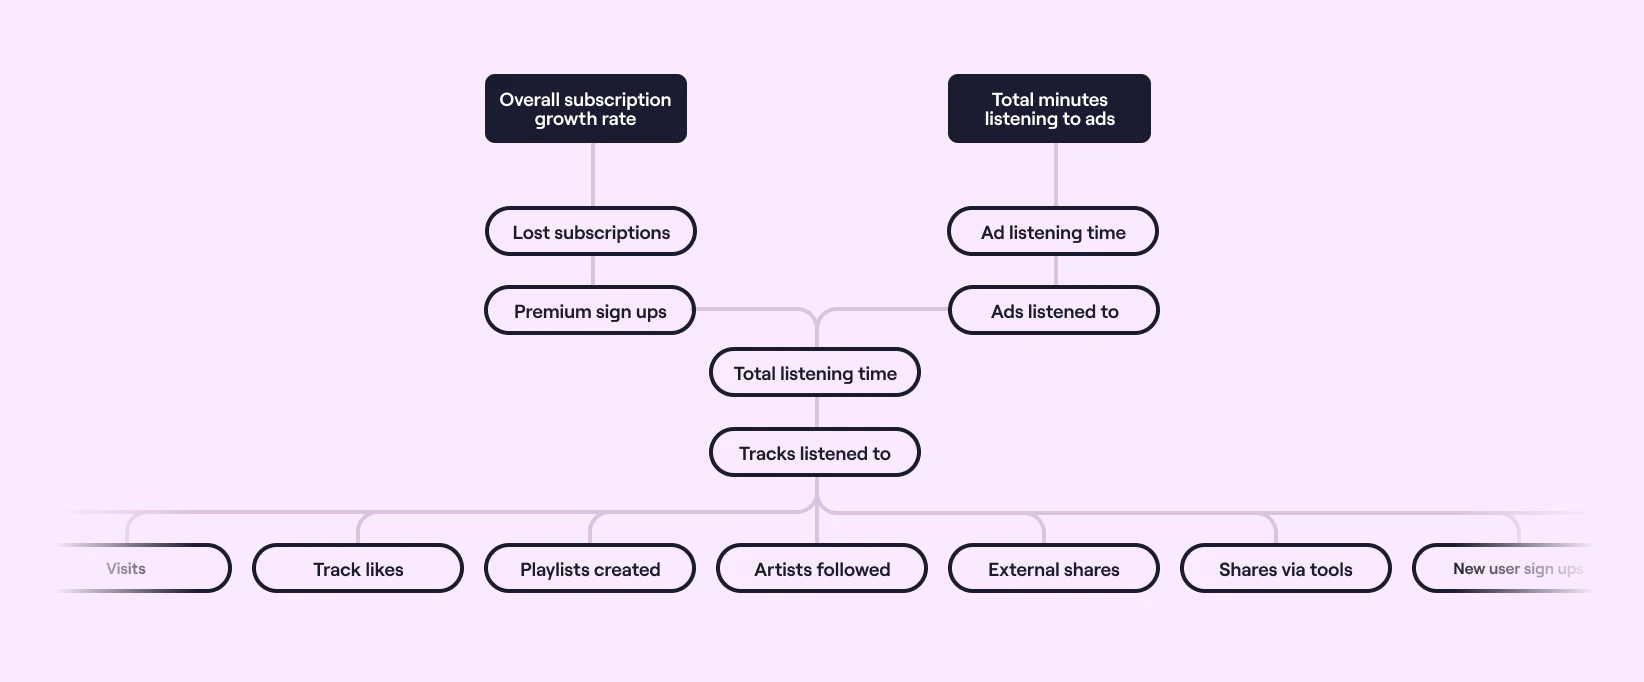 Mapping out pirate metrics for Spotify 3 of 3